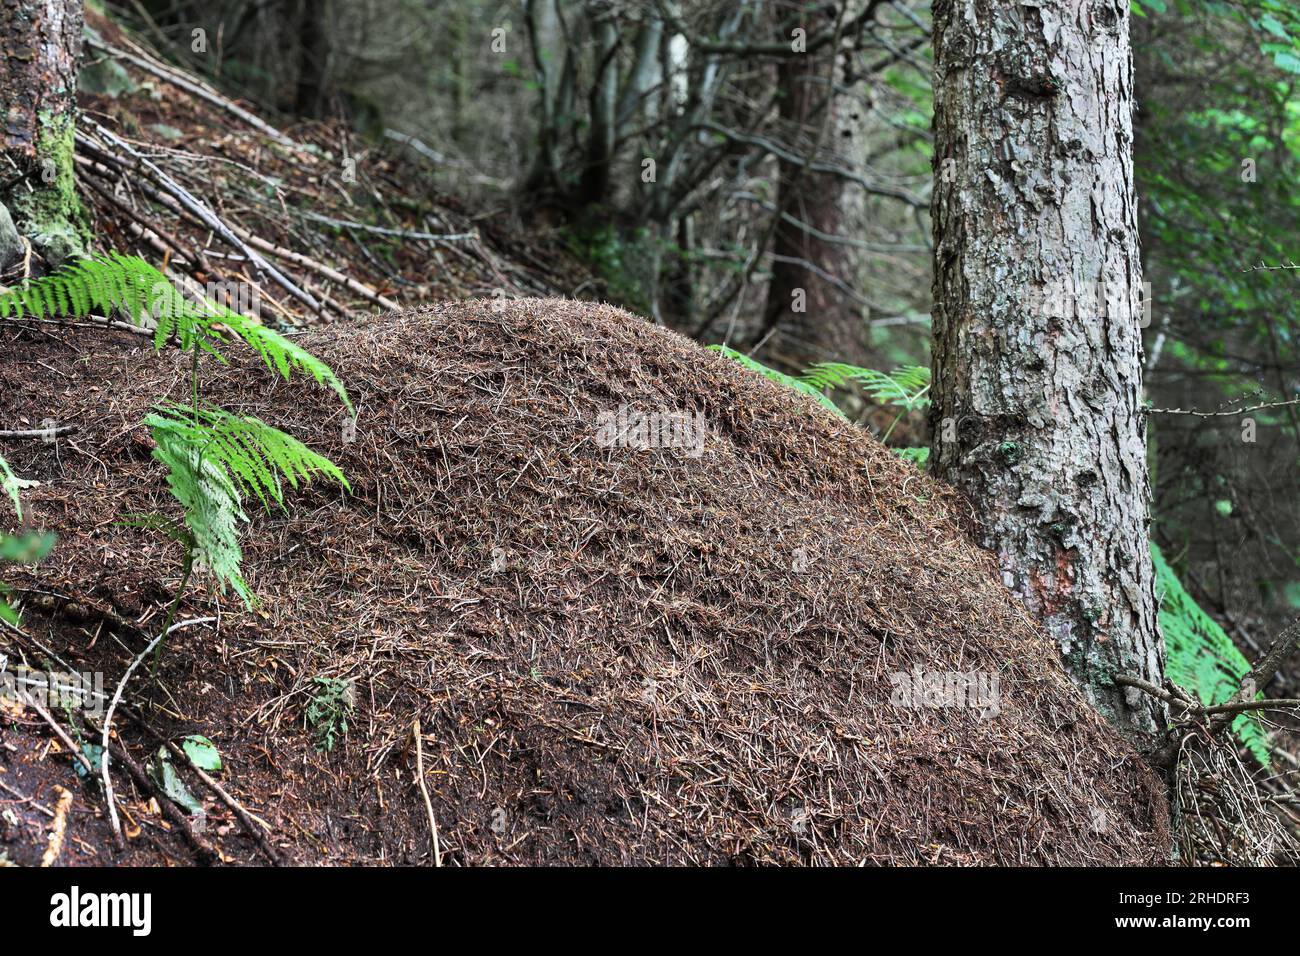 Wood Ants (Formica rufa) Nest Hamsterley Forest, County Durham, Inghilterra nord-orientale, Regno Unito Foto Stock